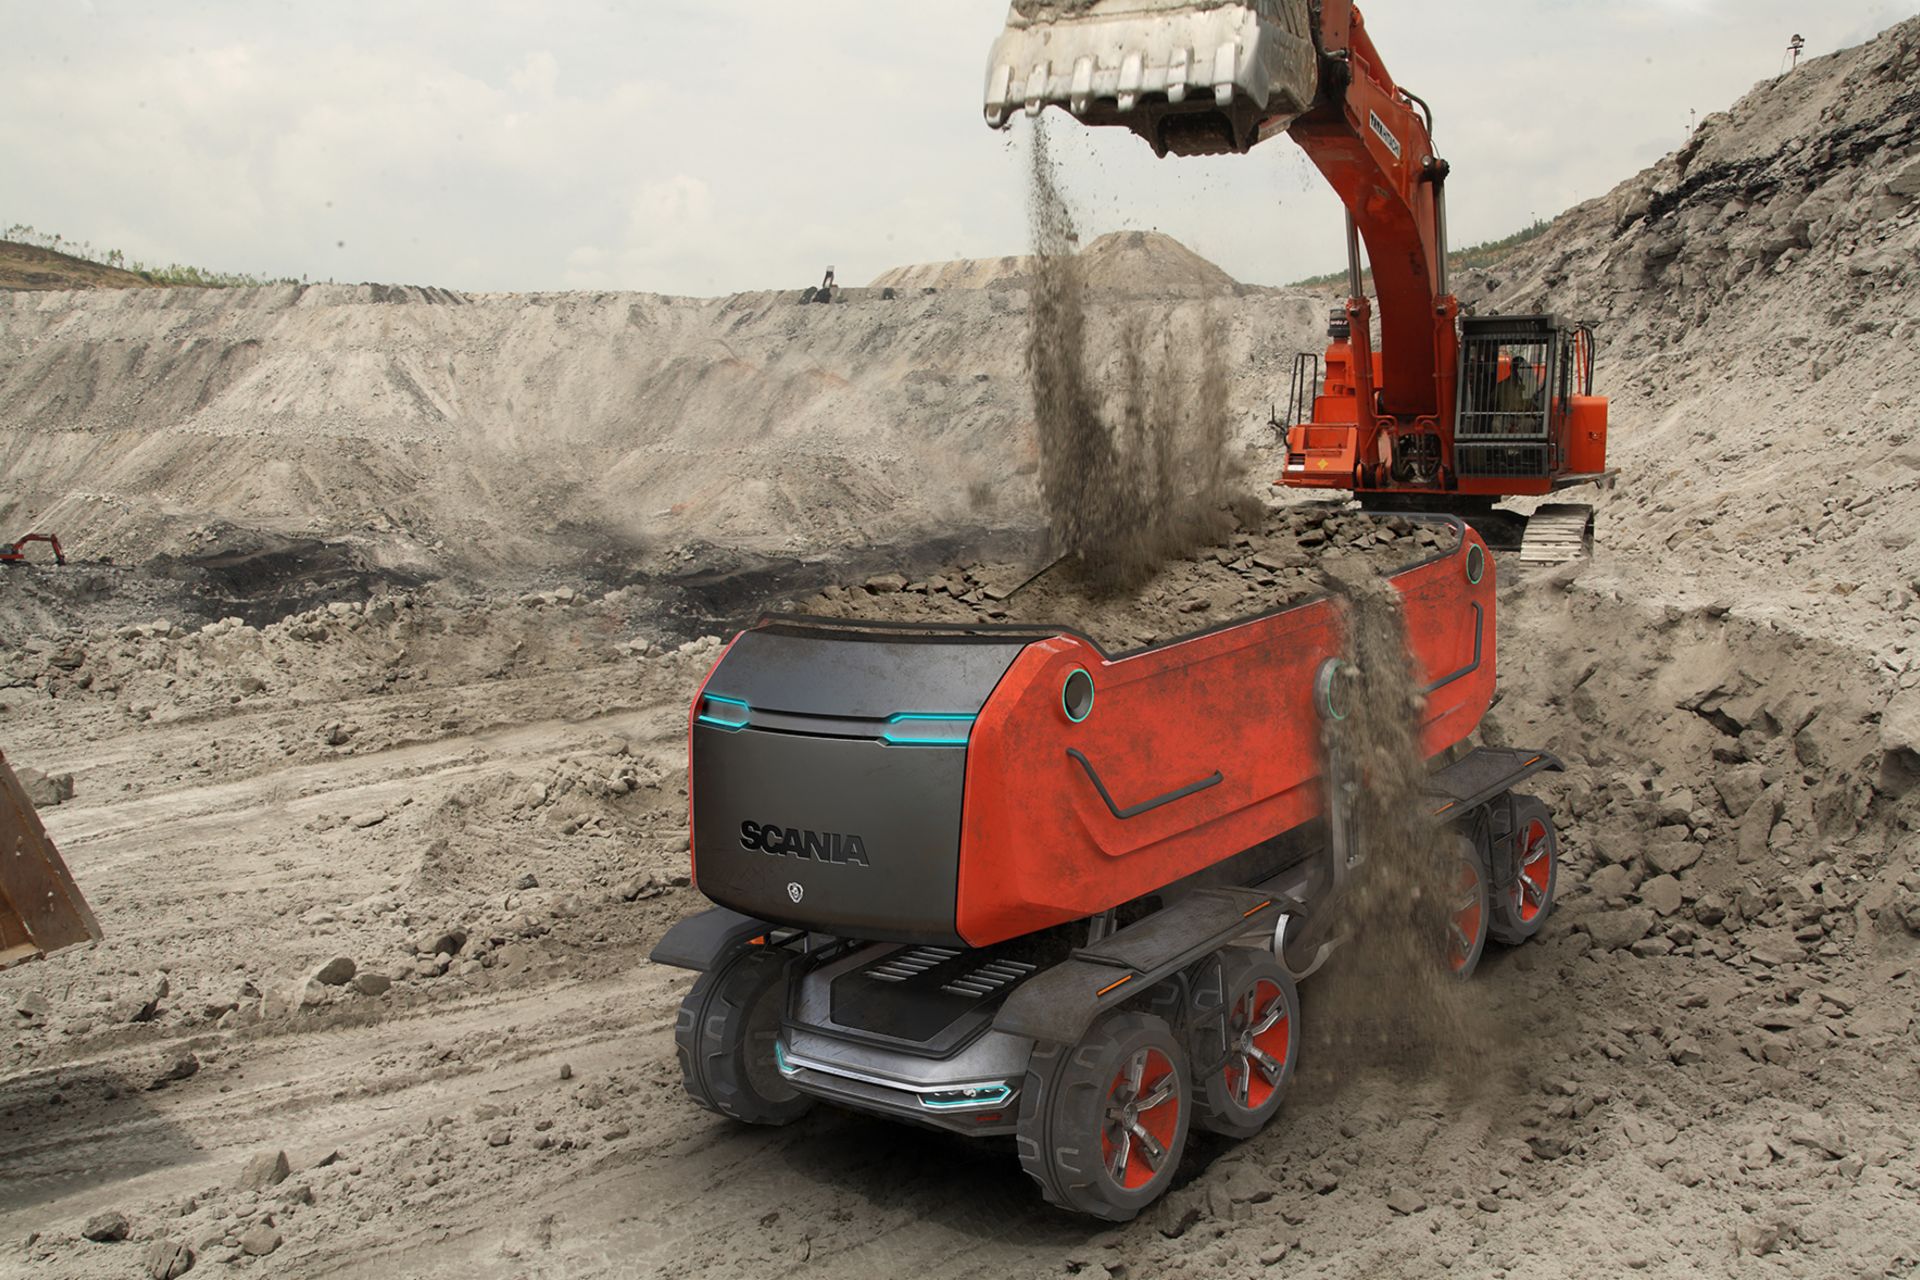 An automated, driverless Scania vehicle drives through a construction site.
                 